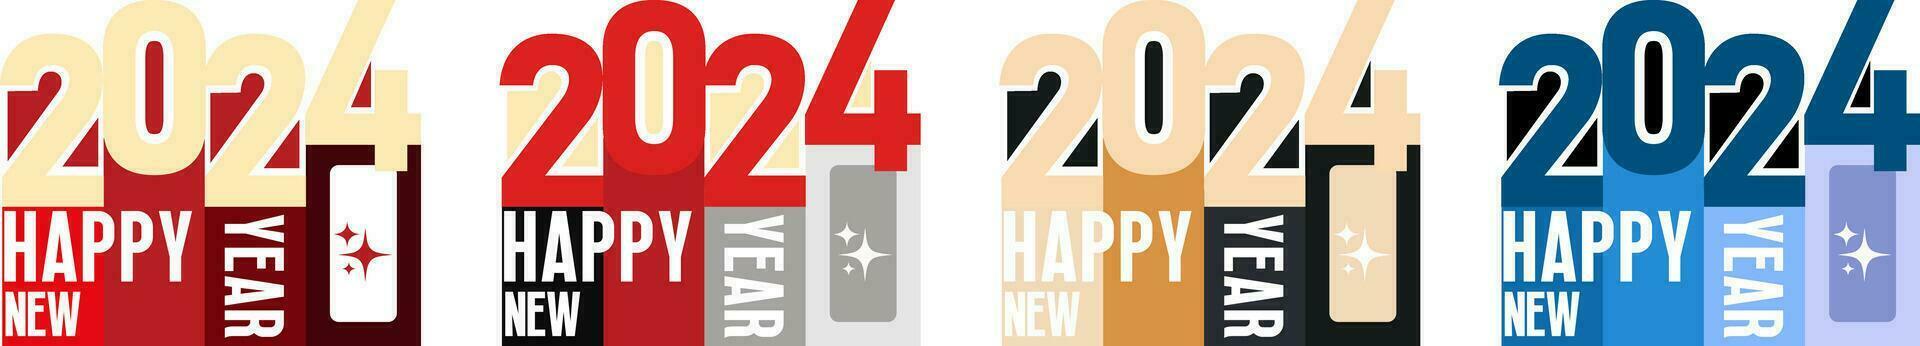 Happy new year 2024 logo vector design with modern ideas and colorful